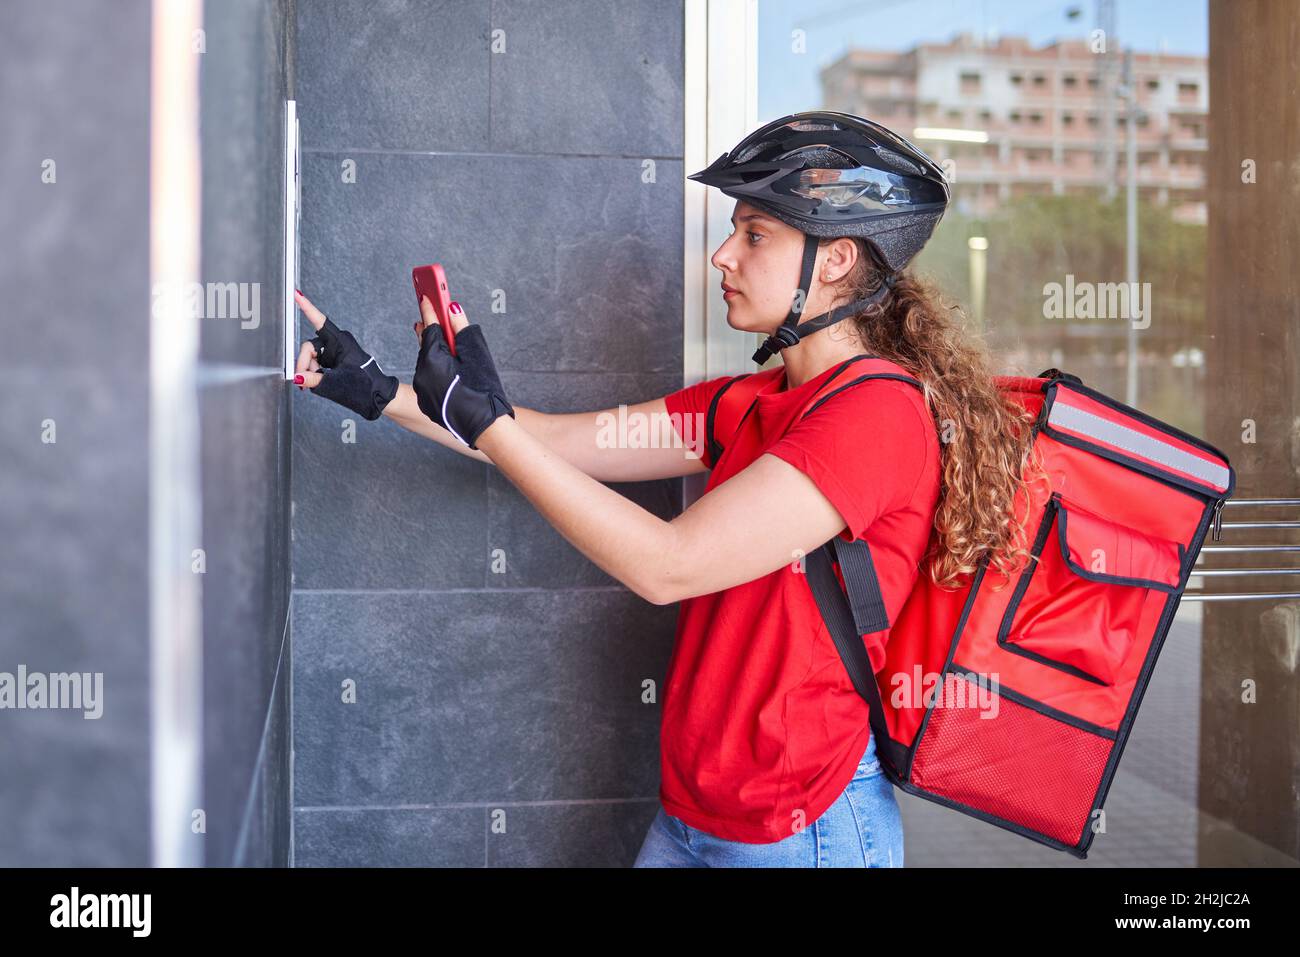 A cyclist delivery girl ringing the intercom bell Stock Photo